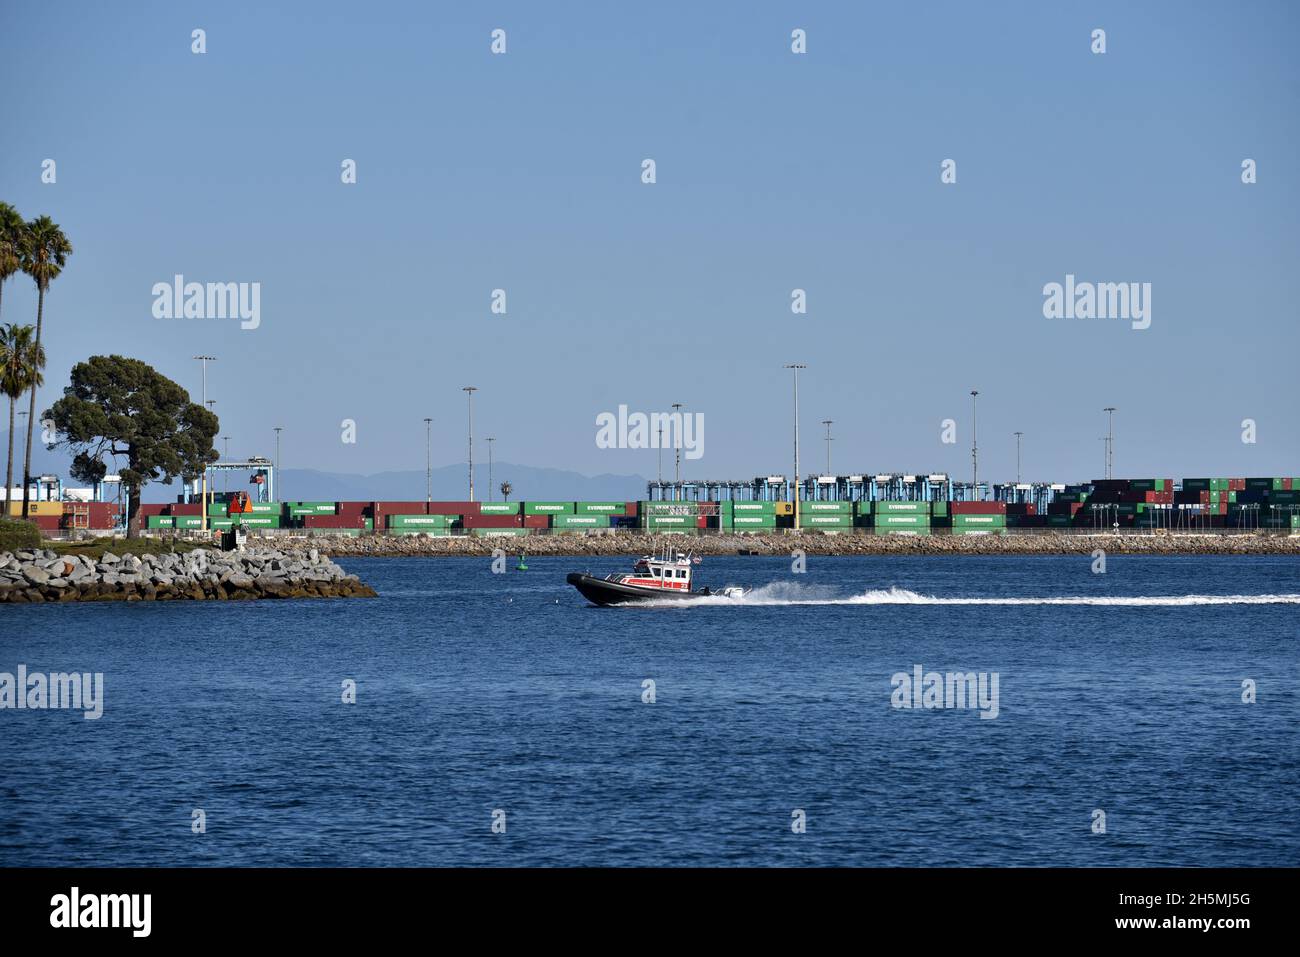 Los Angeles, CA USA - October 15, 2021: Small boat passing the shipping containers and gantry cranes in the main channel of the Port of Los Angeles on Stock Photo